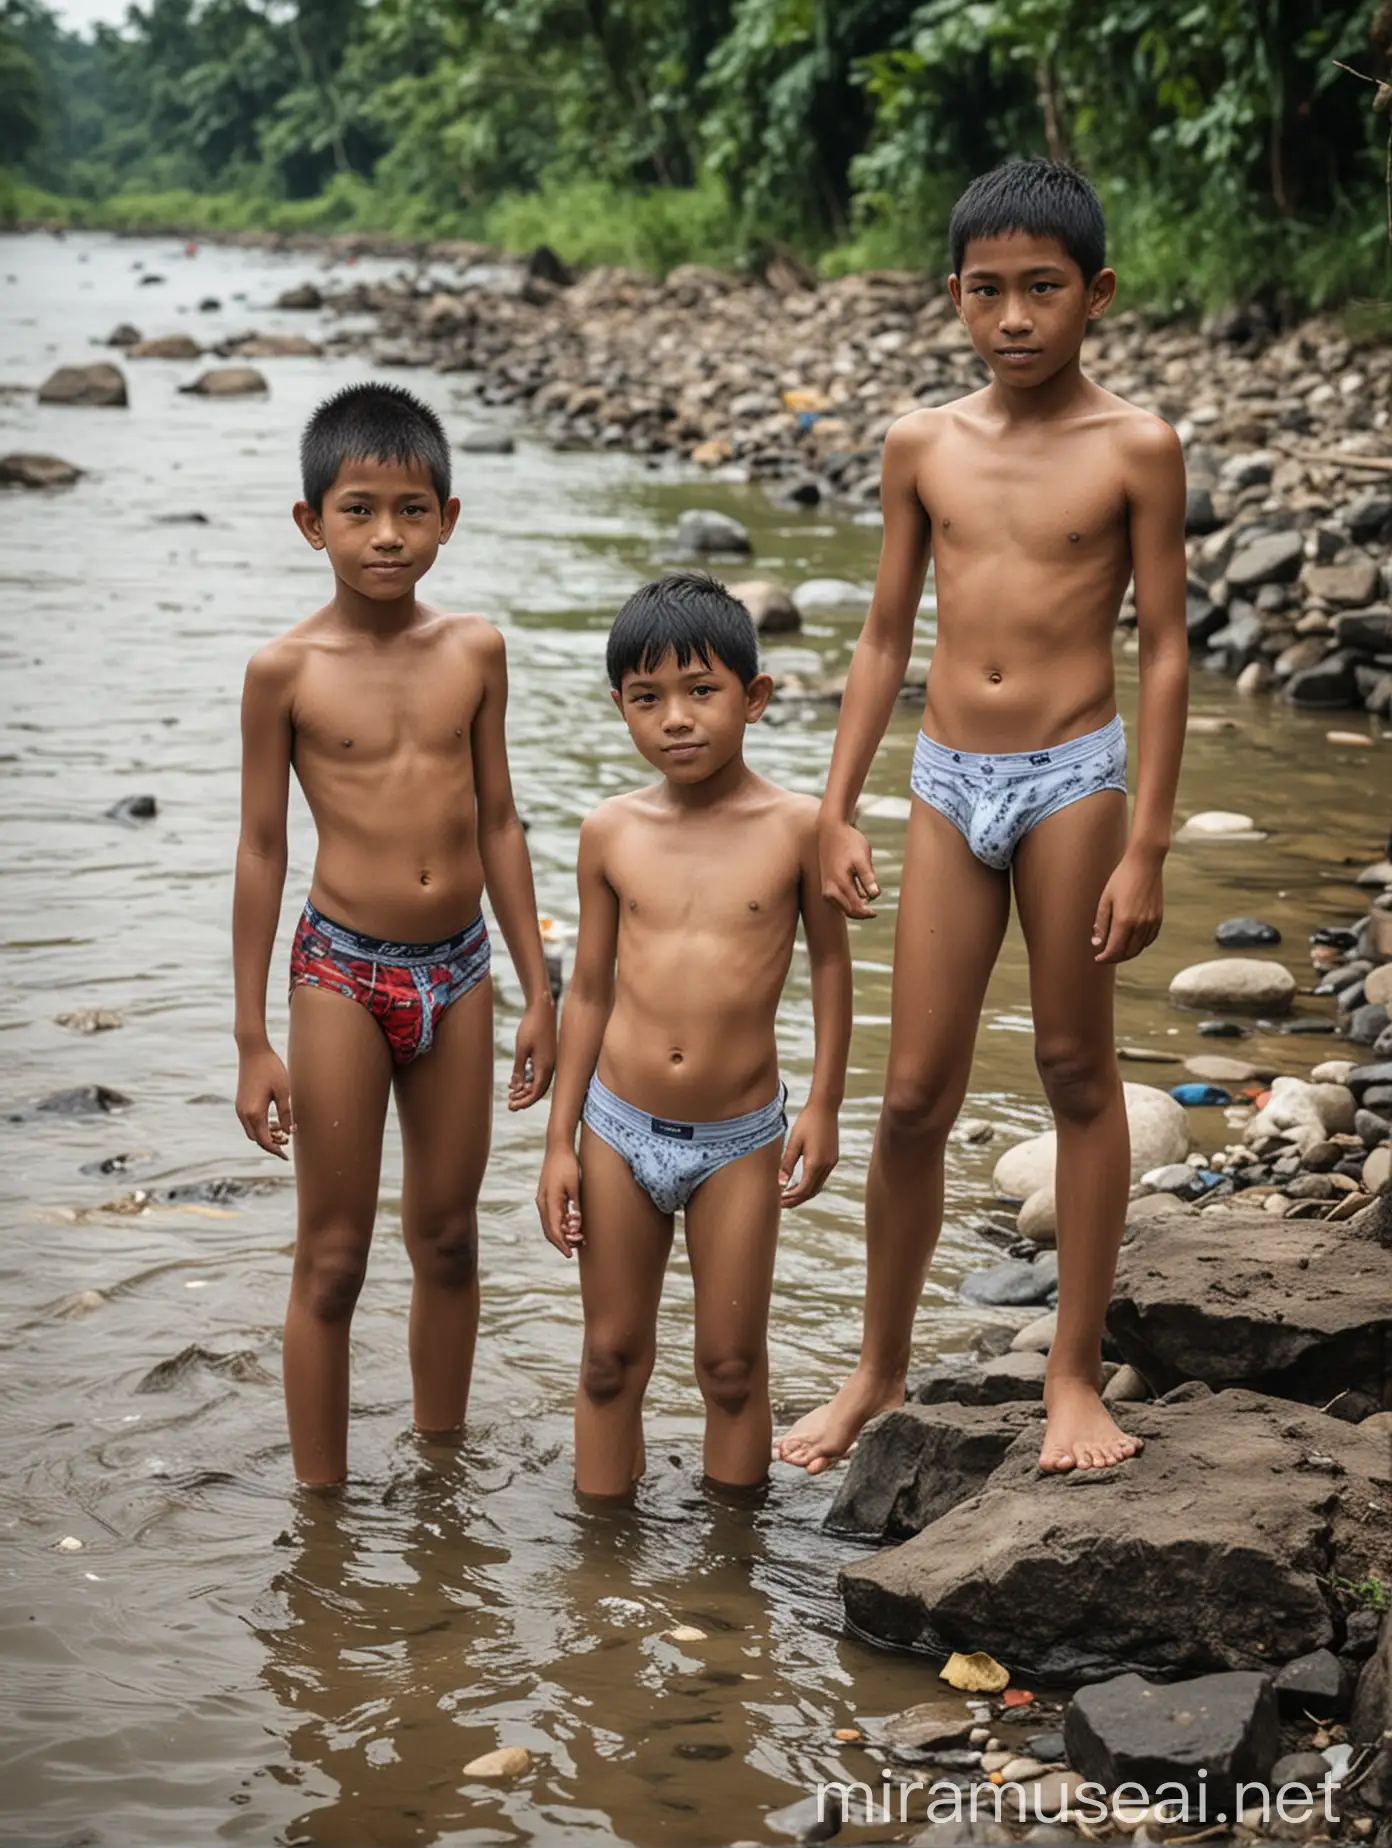 Indonesian Boys Playing in River in Underwear